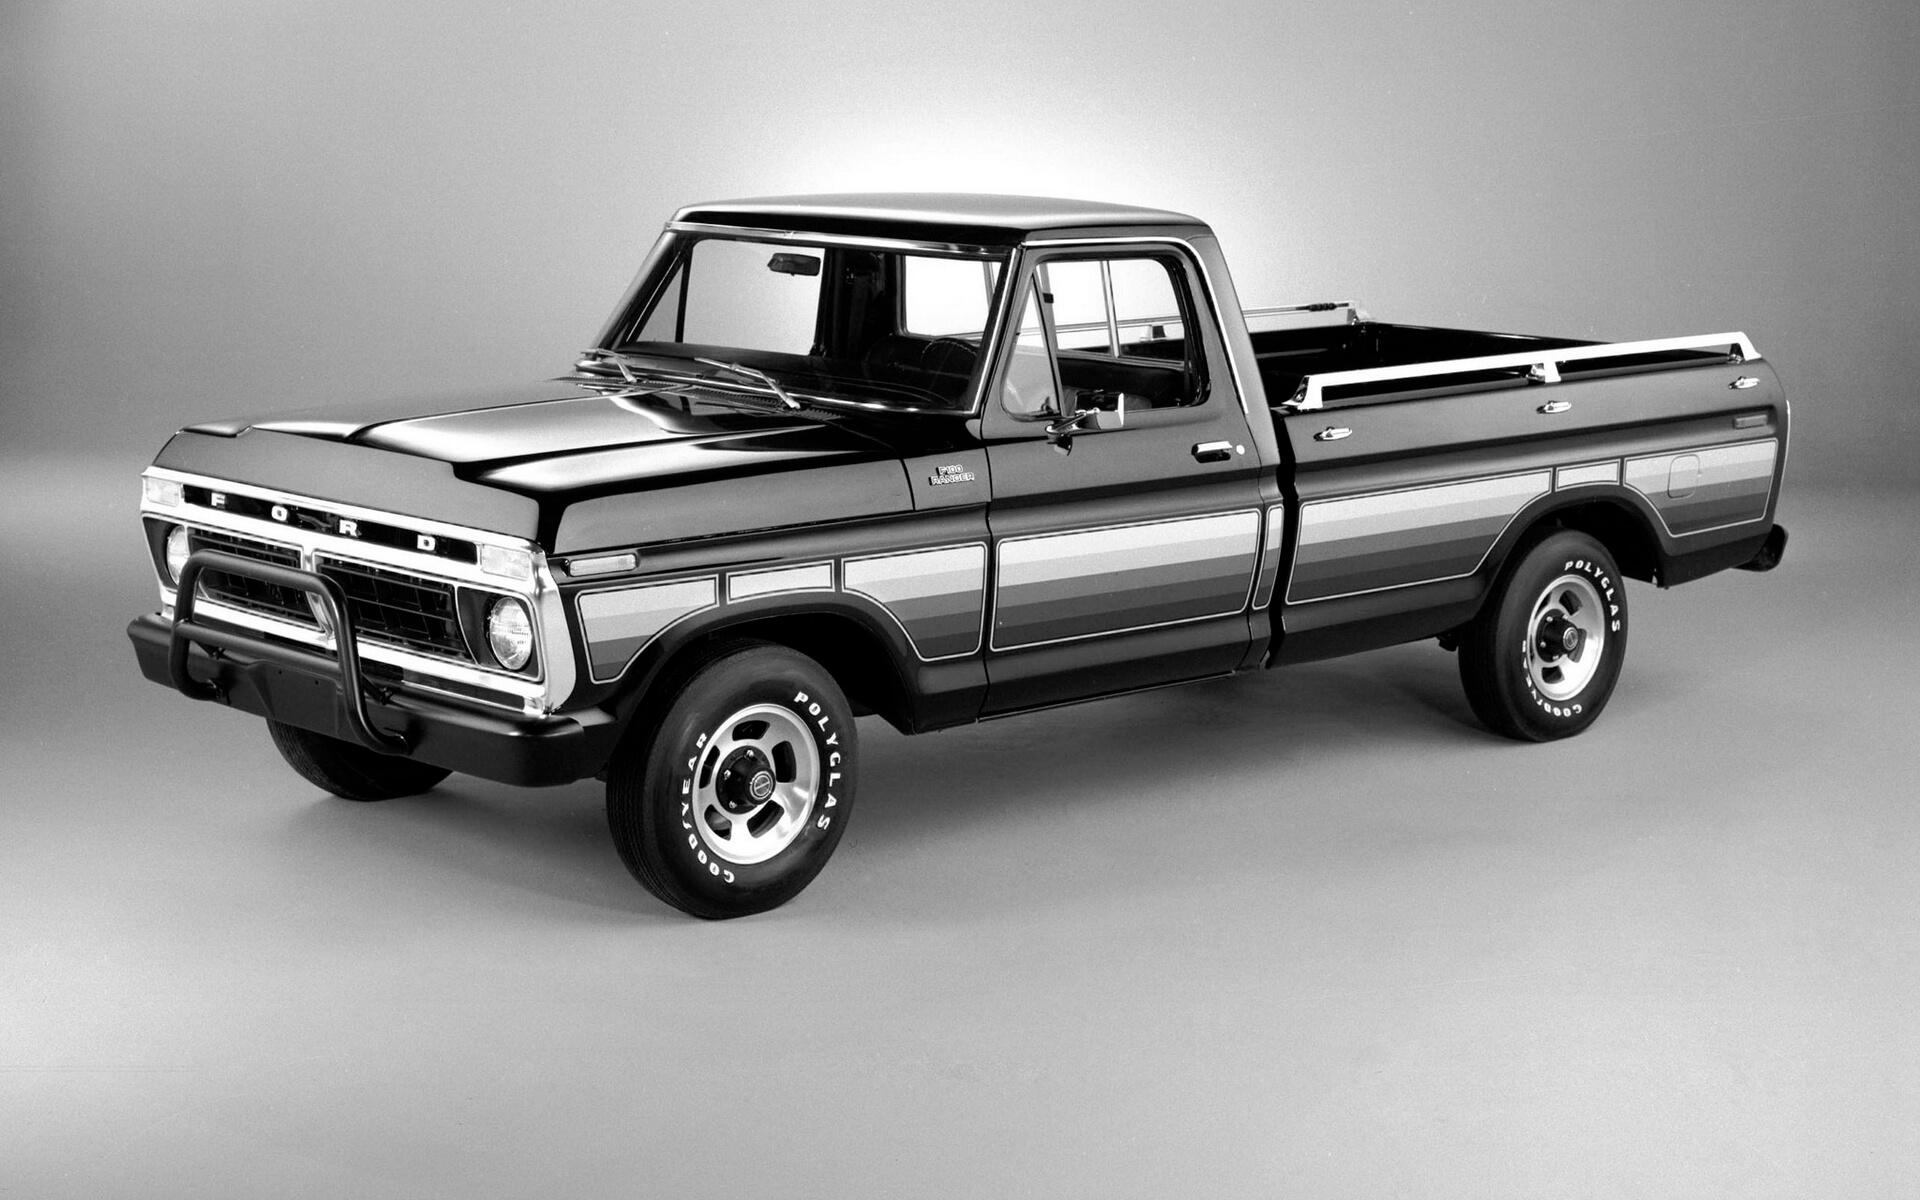 1977 ford f100 wallpaper background